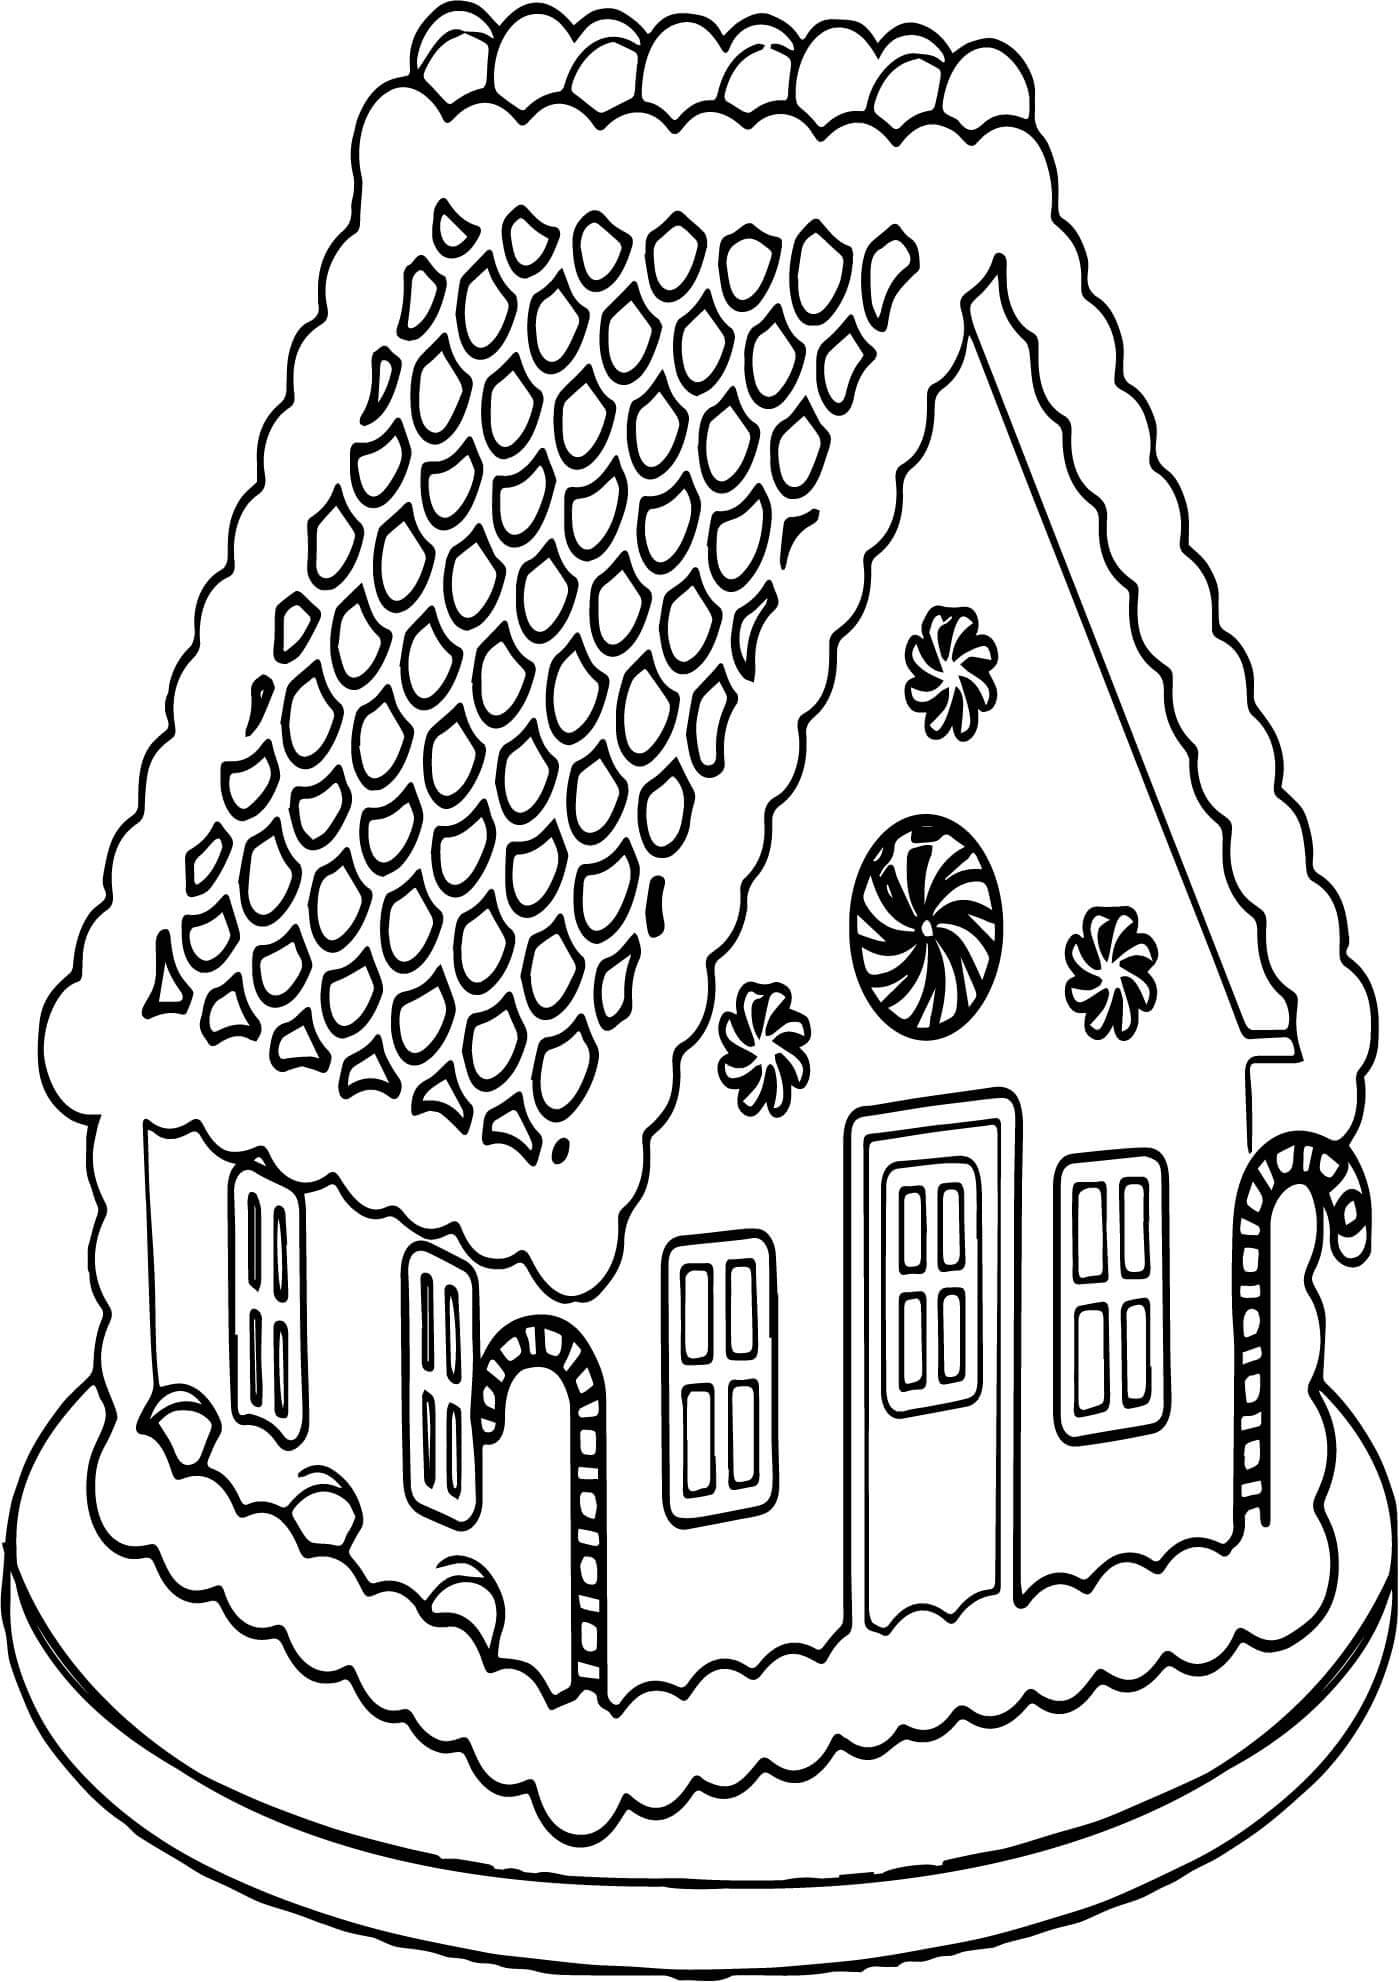 Gingerbread House Coloring Page For Christmas